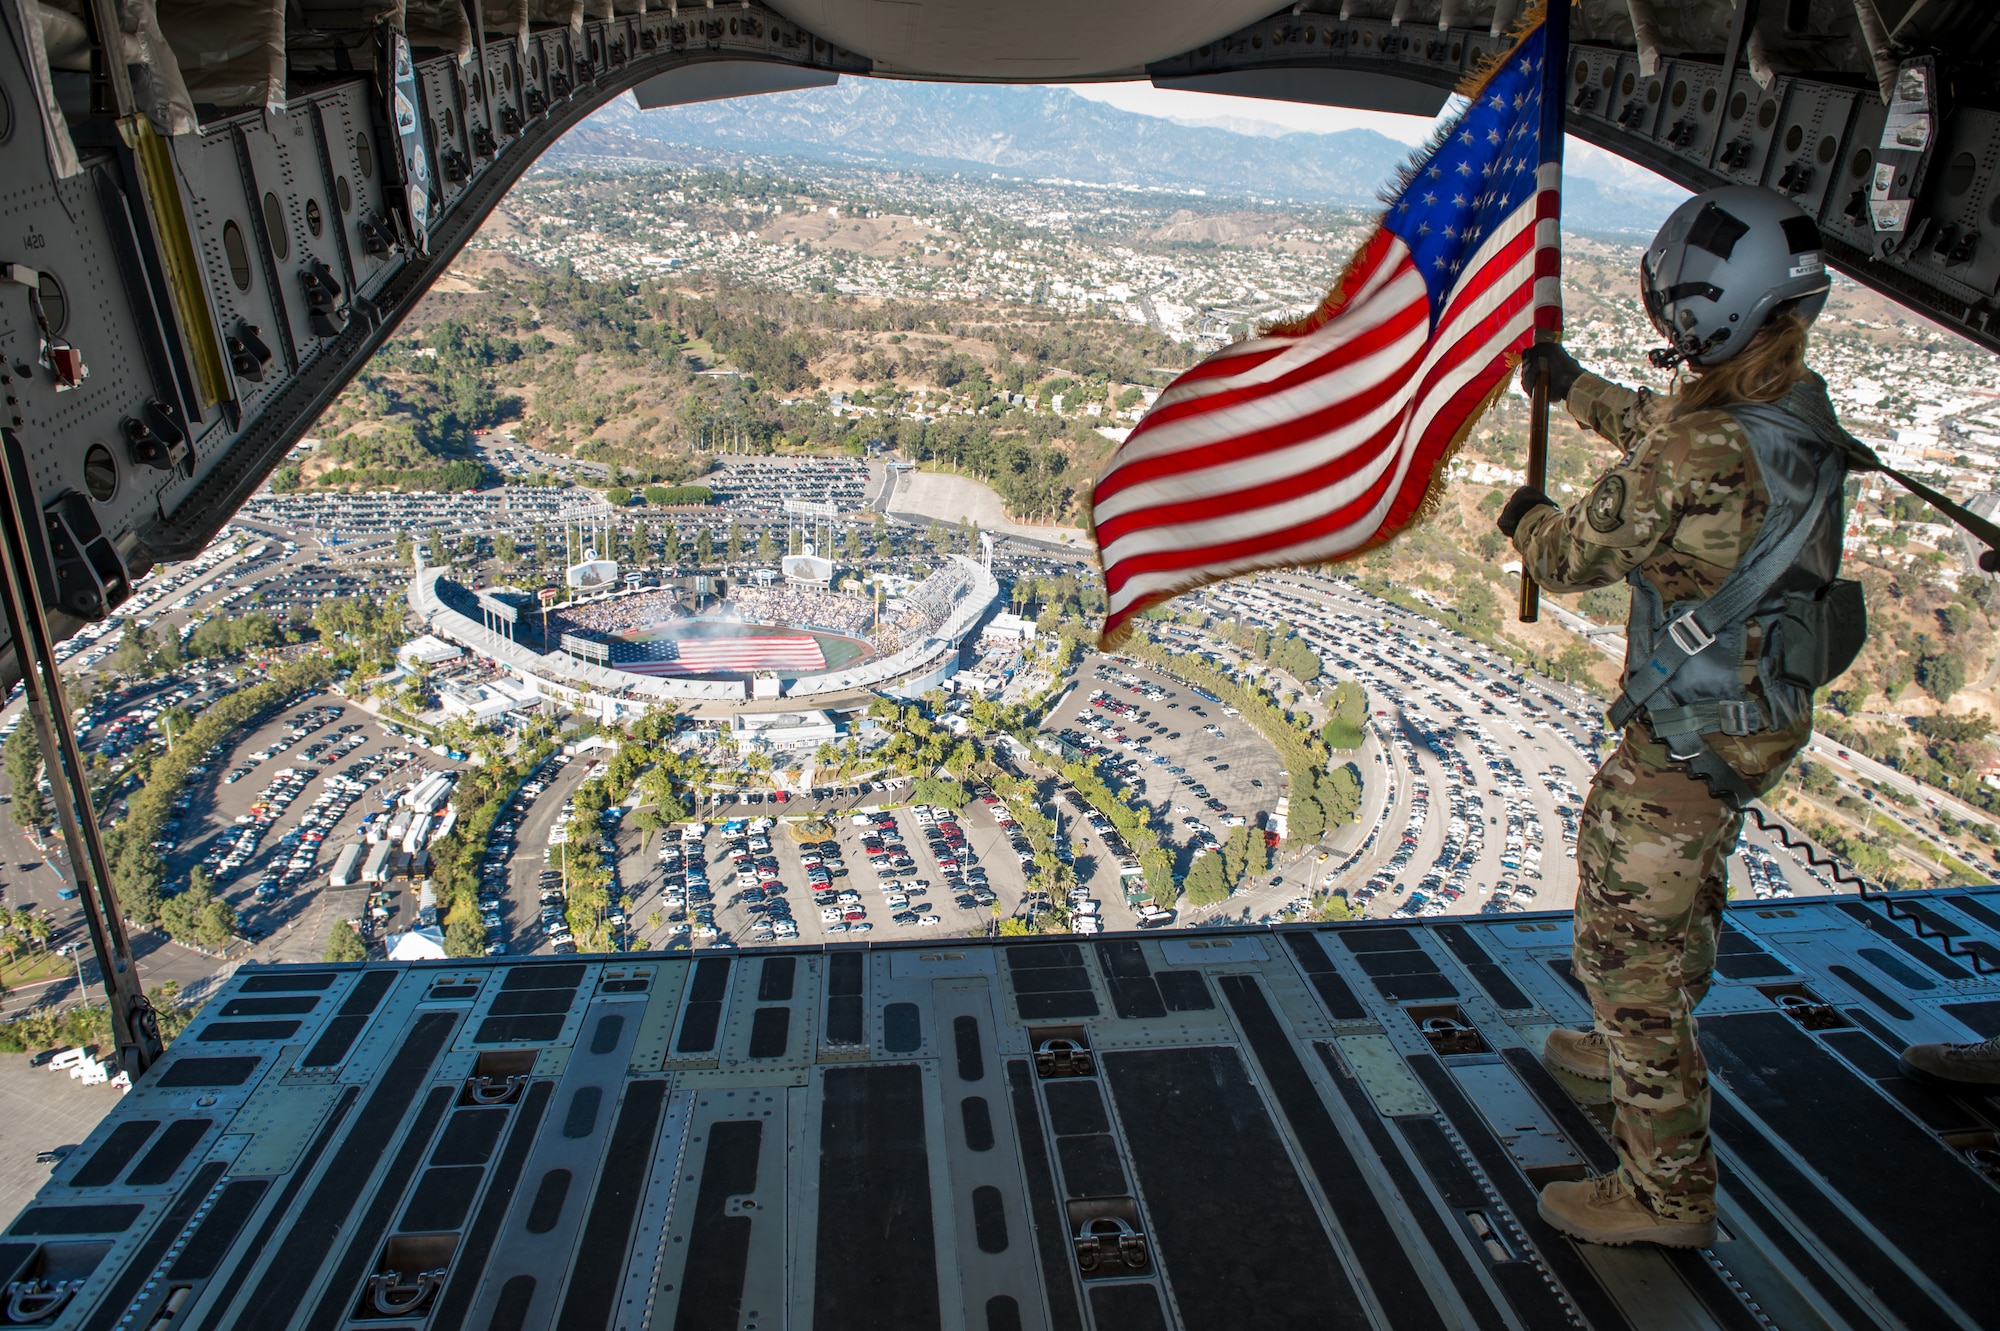 Staff Sgt. Kori Myers, 418th Flight Test Squadron load master, waves the American flag out of the back of a C-17 Globemaster III during the beginning of Game 3 of the National League Championship Series between the L.A. Dodgers and Milwaukee Brewers. The 412th Test Wing at Edwards Air Force Base, California, provided the C-17 for the ceremonial flyover. (U.S. Air Force photo by Kyle Larson)